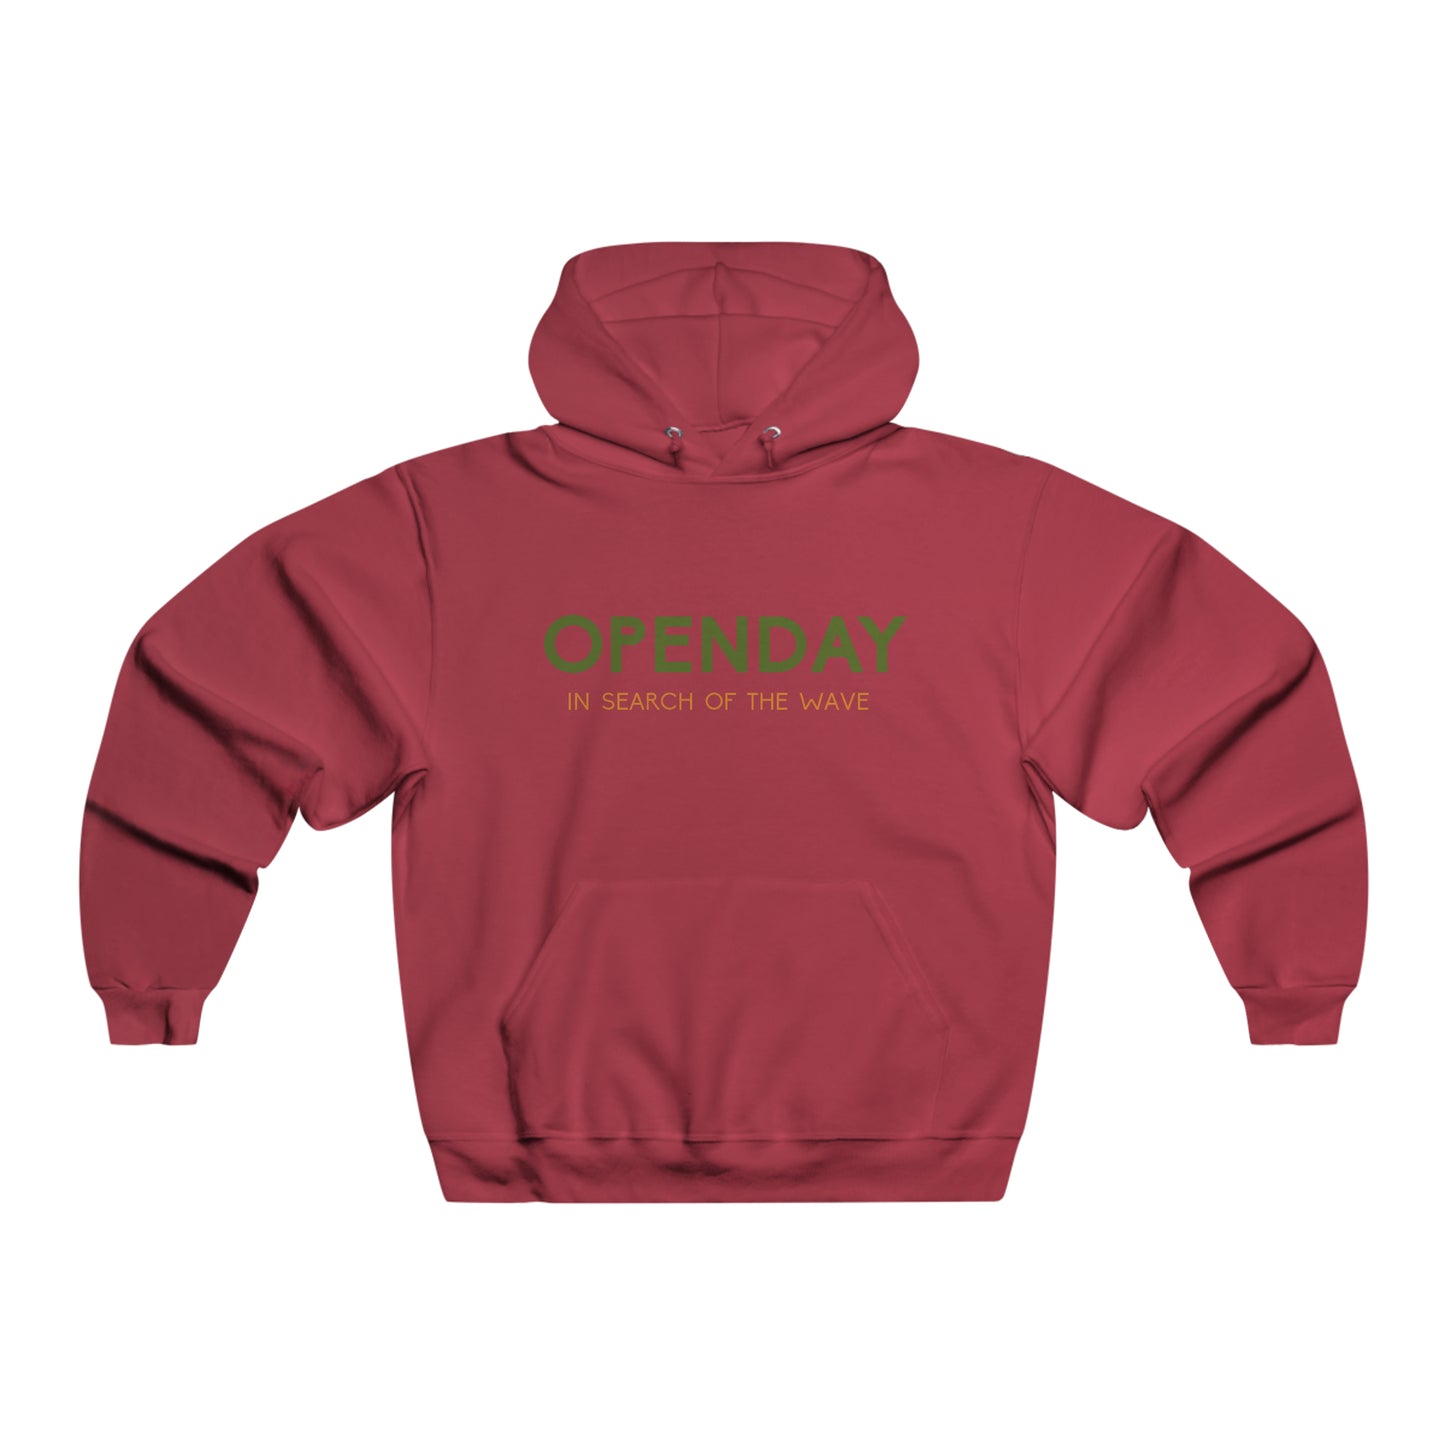 In search of the wave - Unisex Hooded Sweatshirt